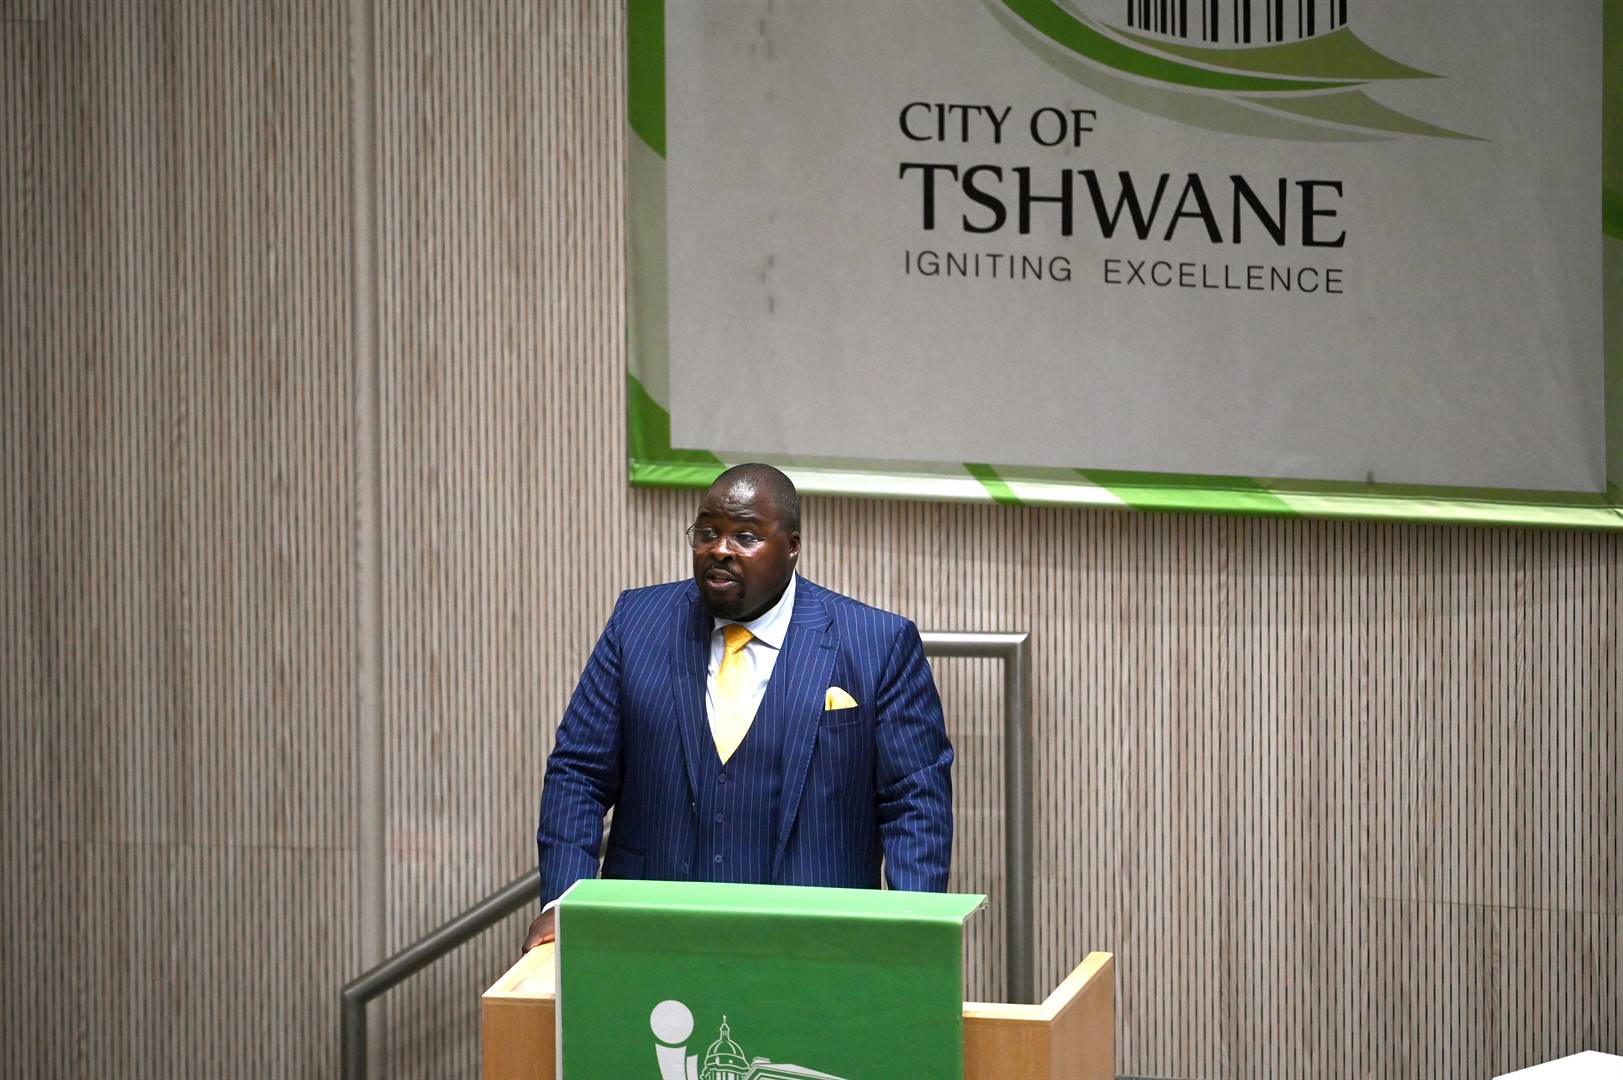 News24 | 'Can we behave like adults?': Tshwane council sitting marred by extensive bickering and jeering